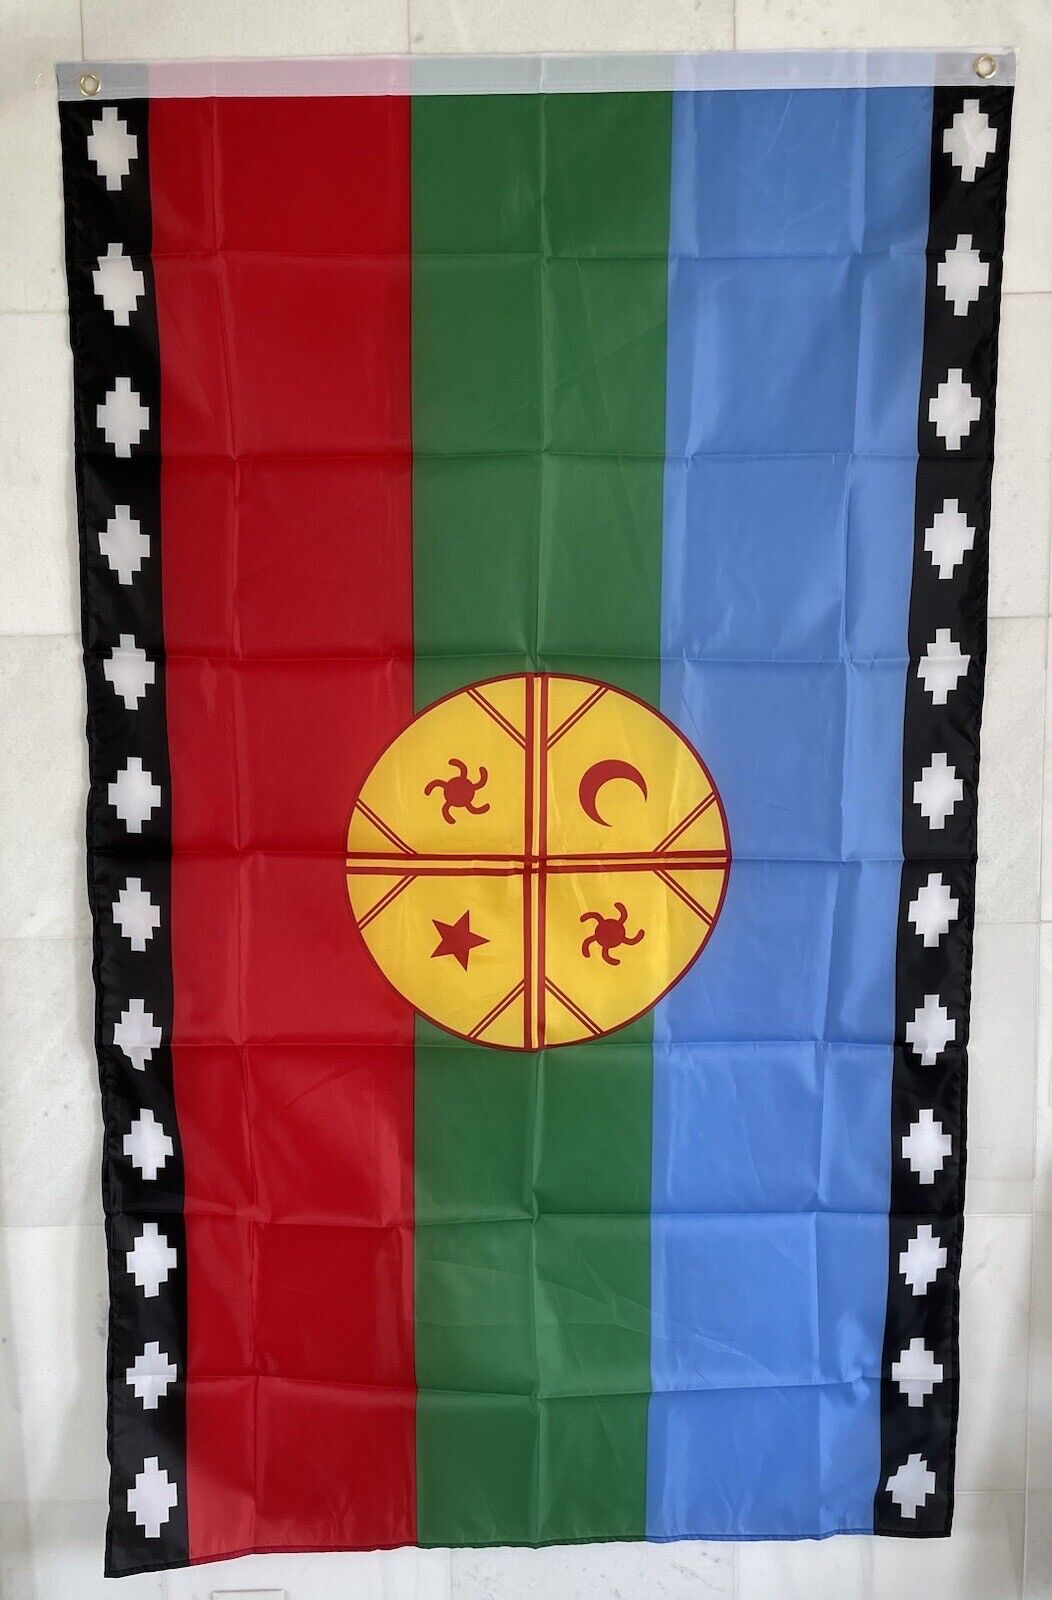 35”x59” Bandera Mapuche / Flag of The Mapuches 90 cm X 150 cm. Chile.